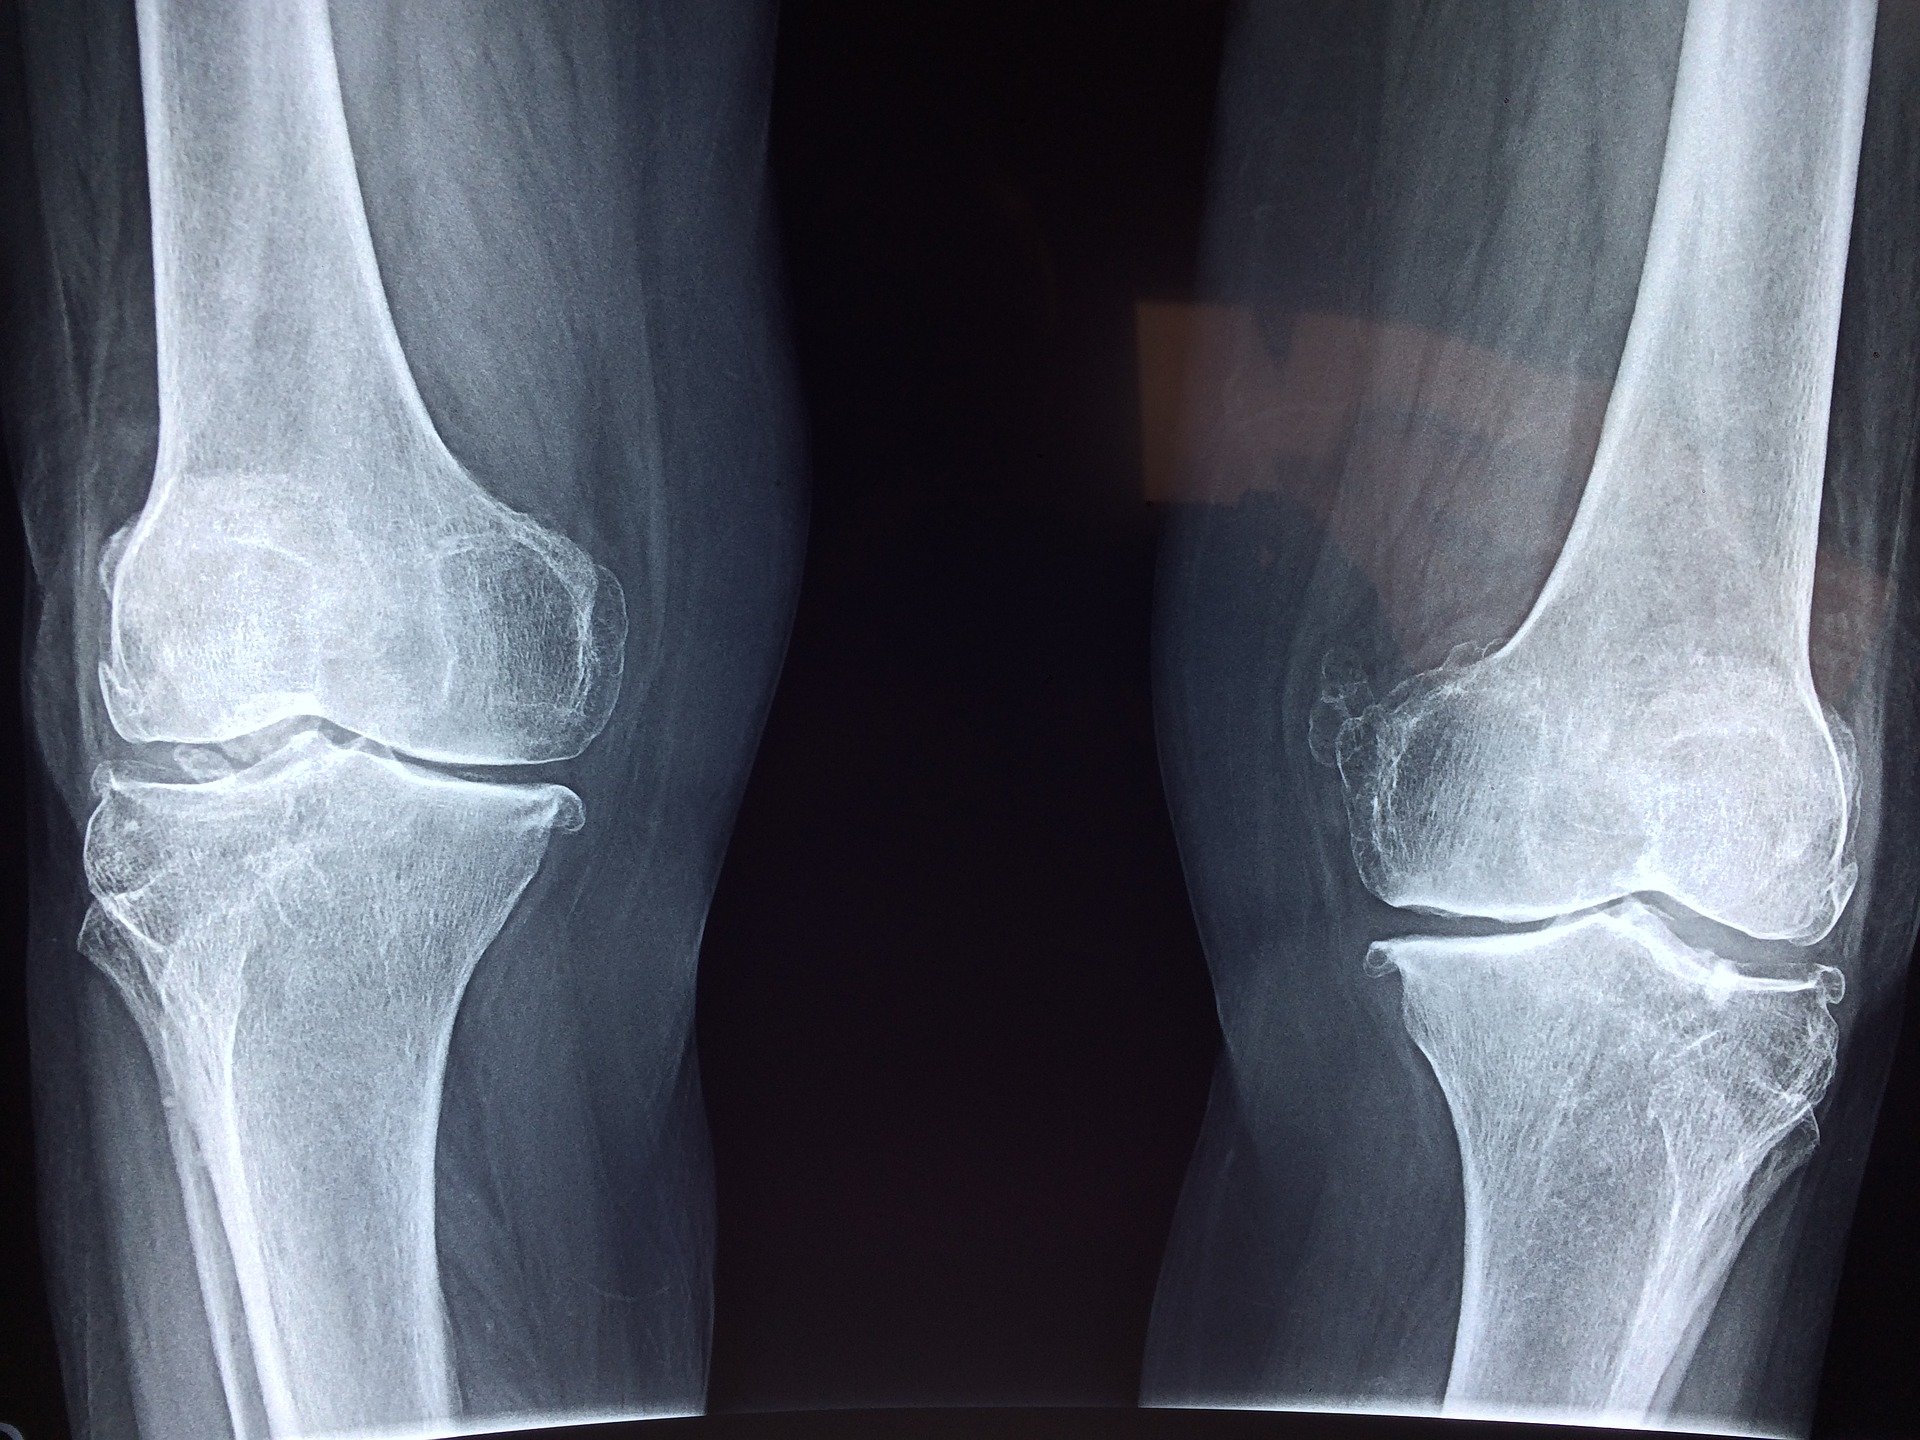 osteoarthritis and low carb diet